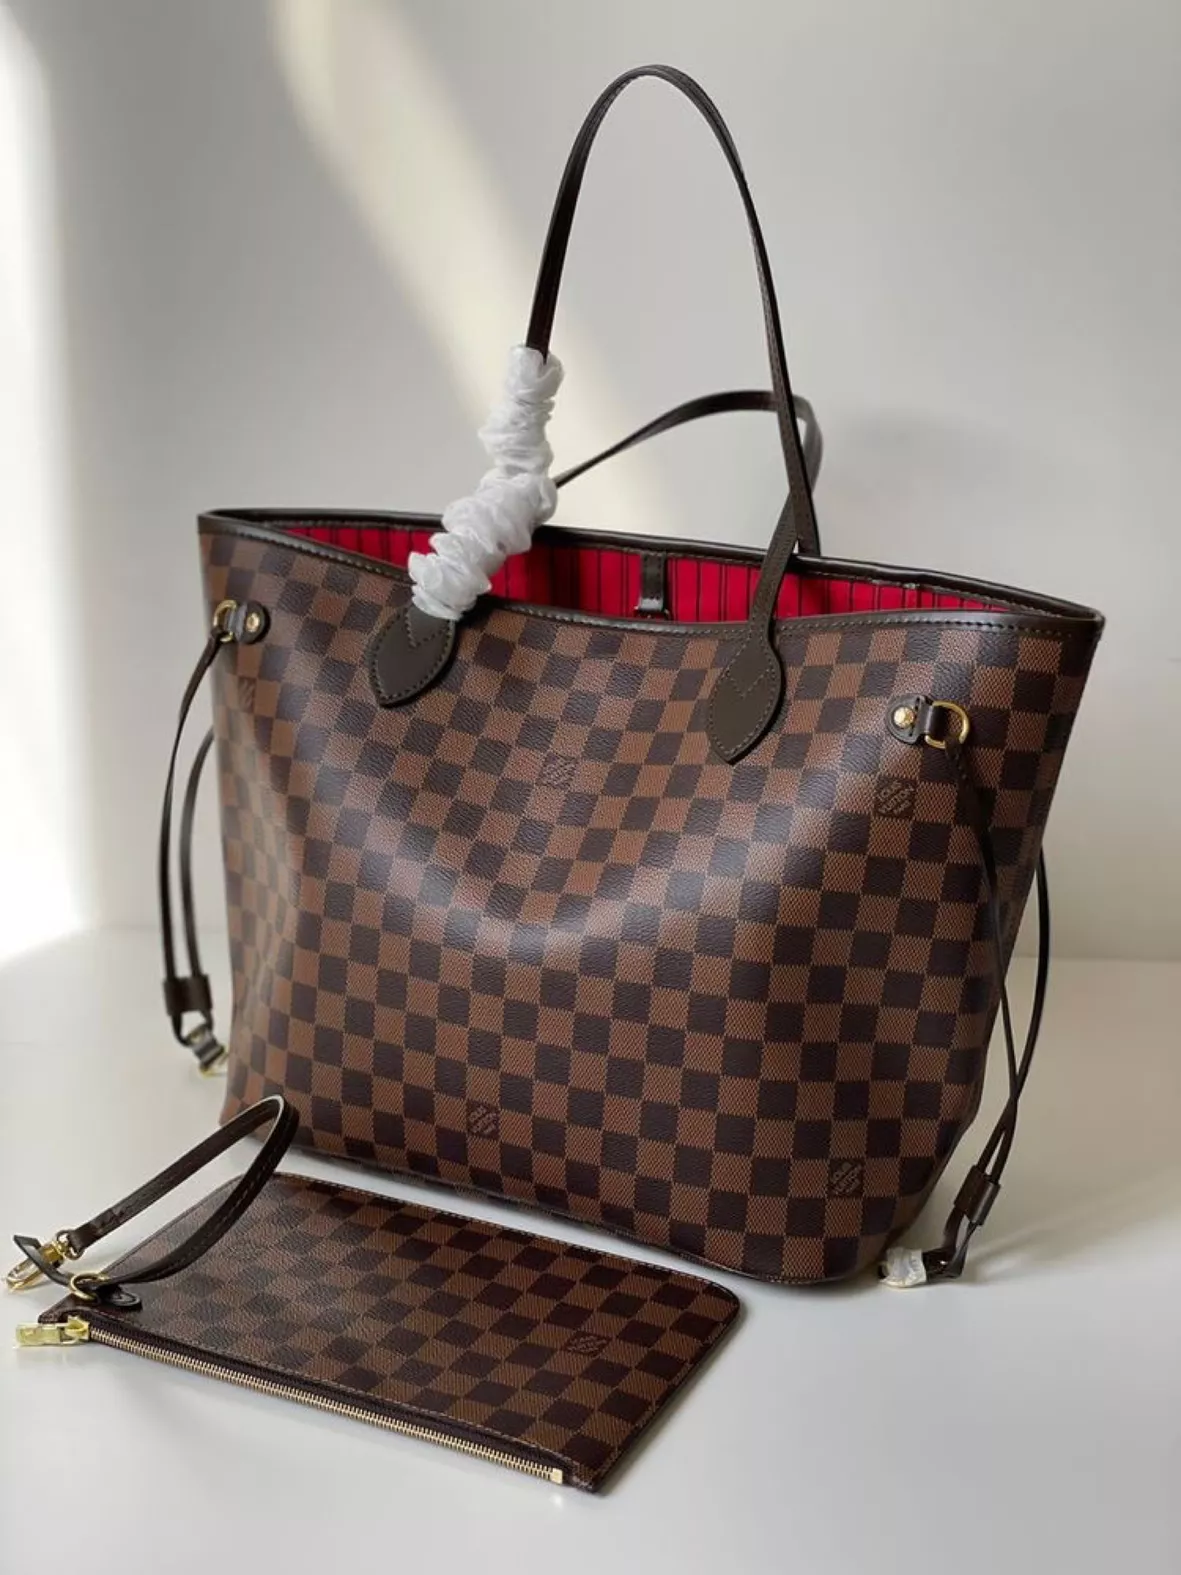 DHgate Louis Vuitton Style Cluny MM Dupe Bag & Designer Dior